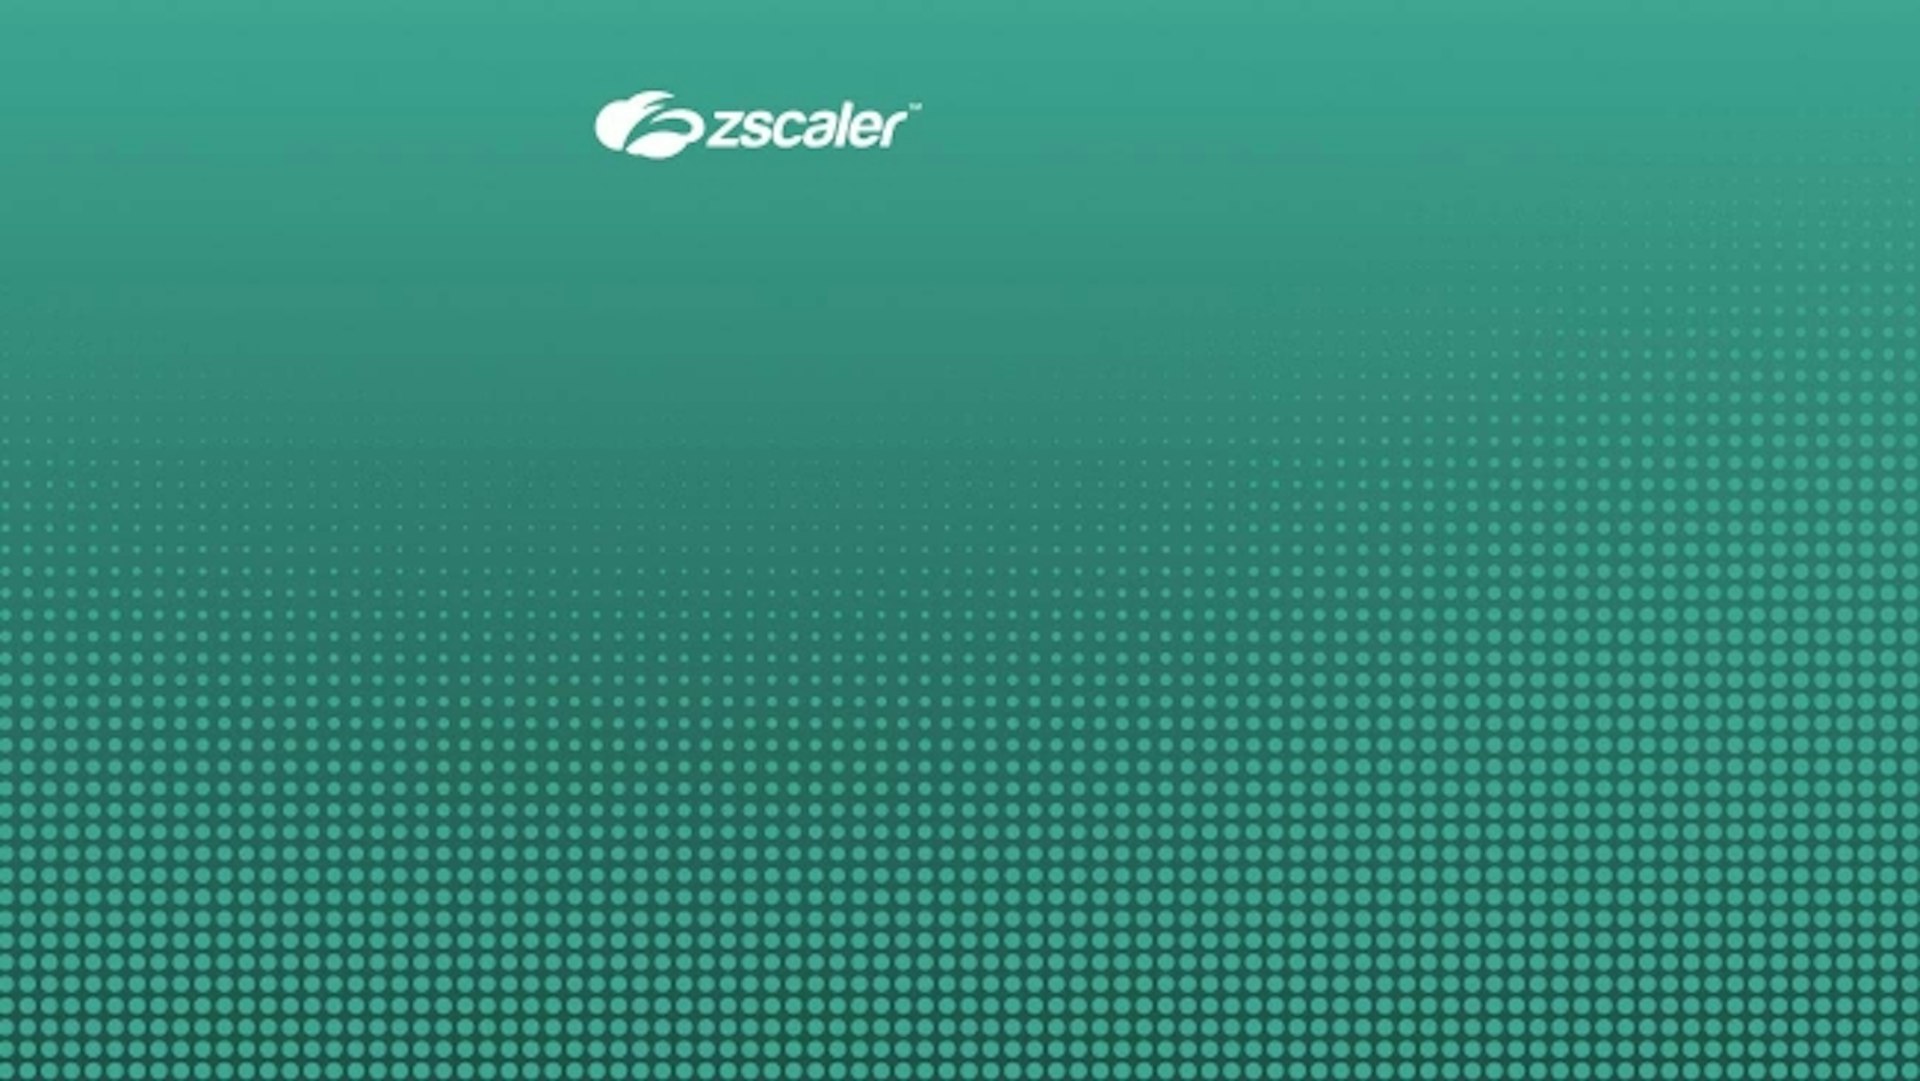 Zscaler Announces Industry-First, Integrated SaaS Supply Chain Security Capabilities with the Acquisition of Canonic Security